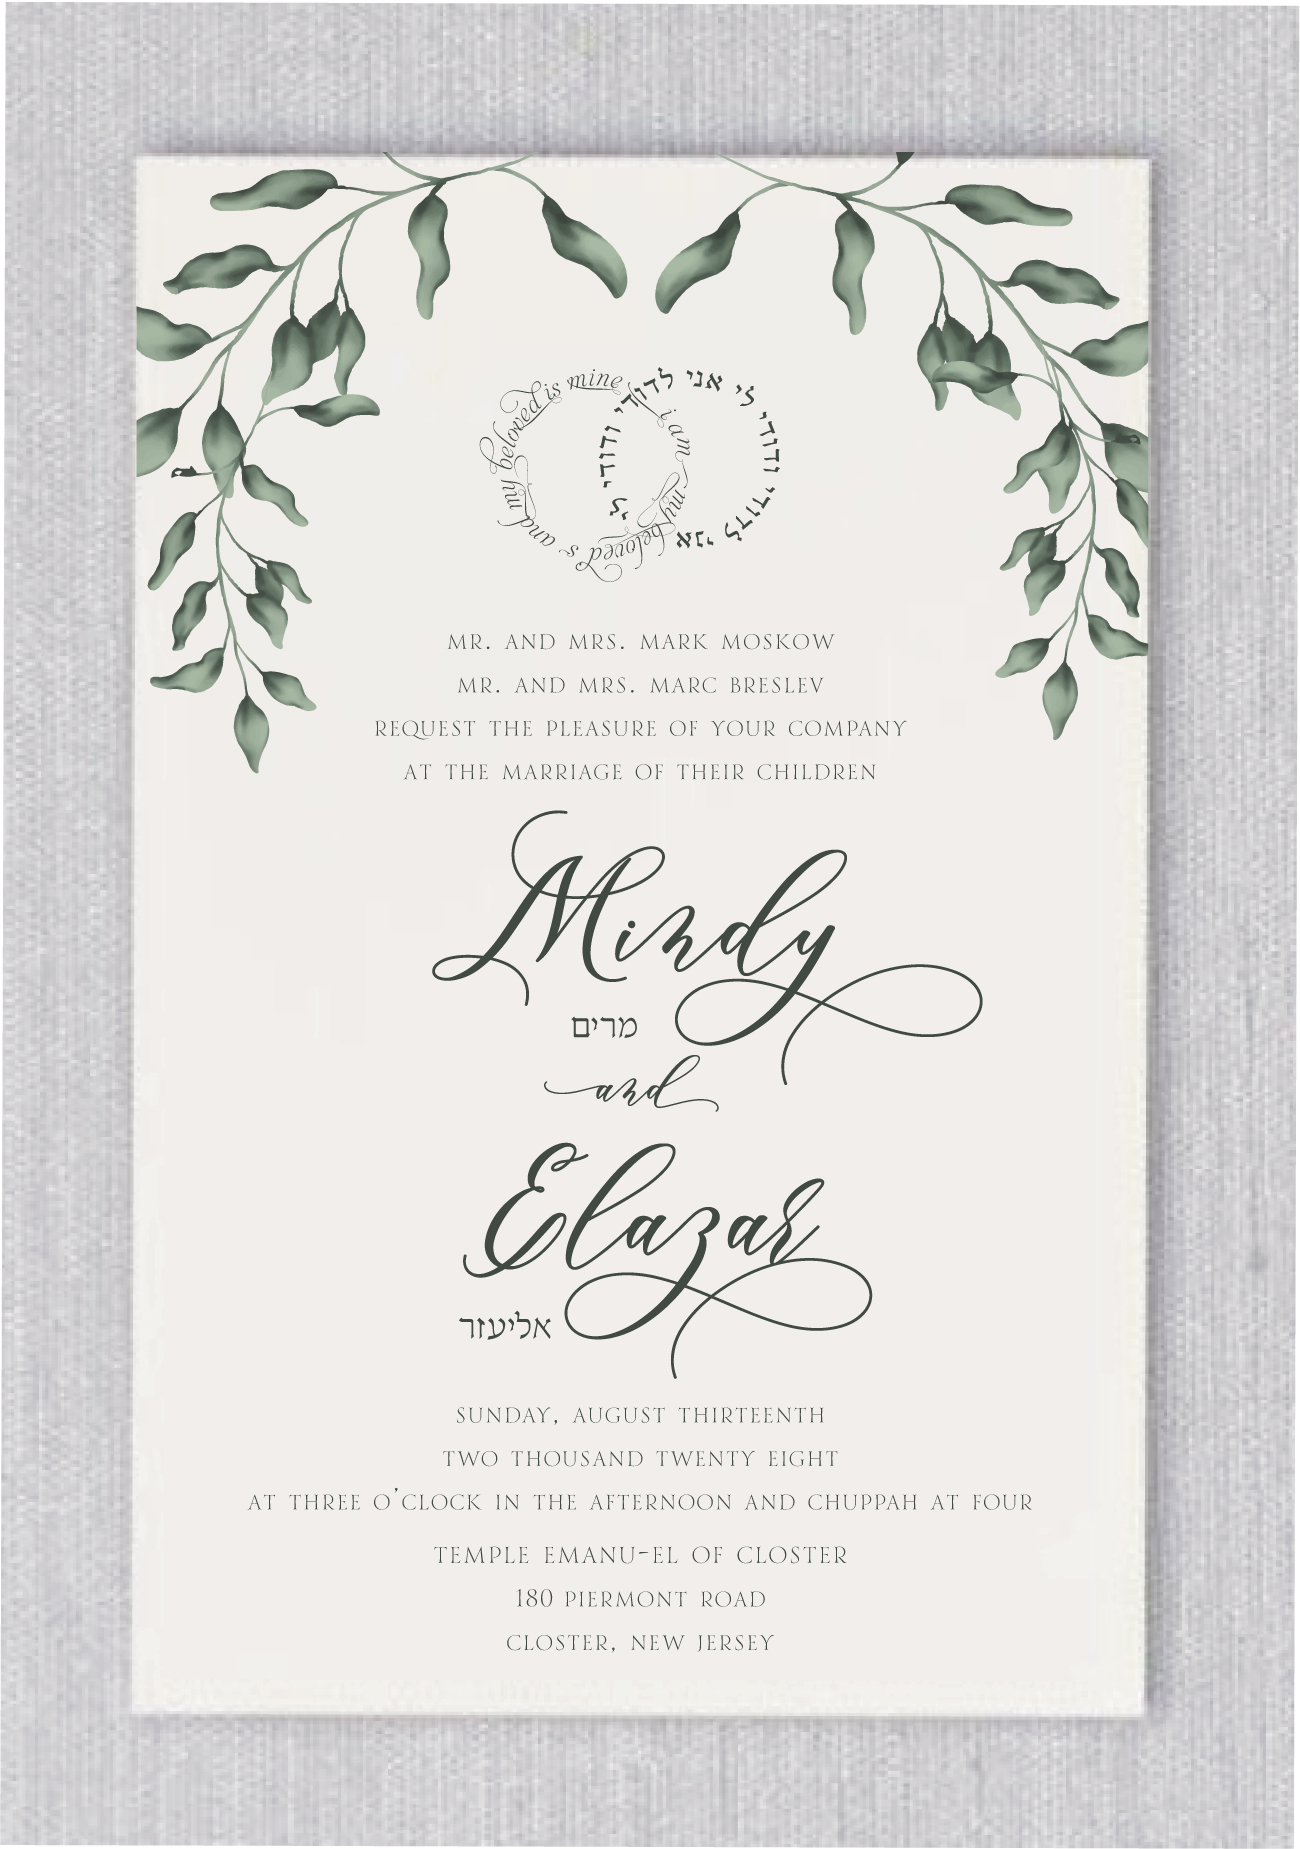 This Chuppah of Heart Jewish Wedding Invitations features a gorgeous a beautiful quote in Hebrew text read: “Ani L'Dodi V'Dodi Li" and “i am my beloved and my beloved is mine” in Hebrew and English. Your names in a unique staggered layout while your remaining details are displayed in a classic sans serif.